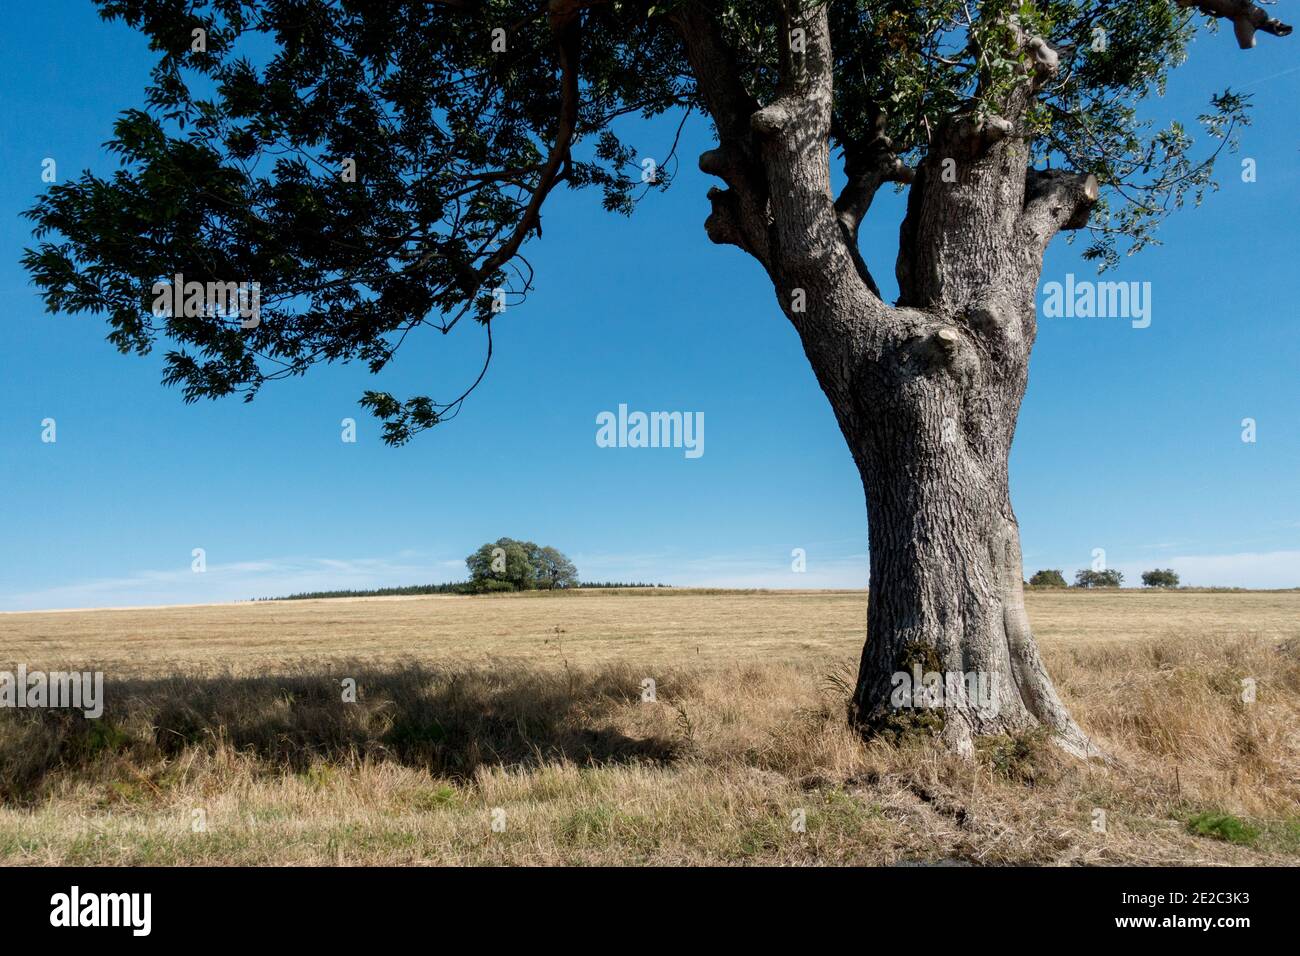 Fraxinus excelsior tree, European ash tree in land scenery Stock Photo